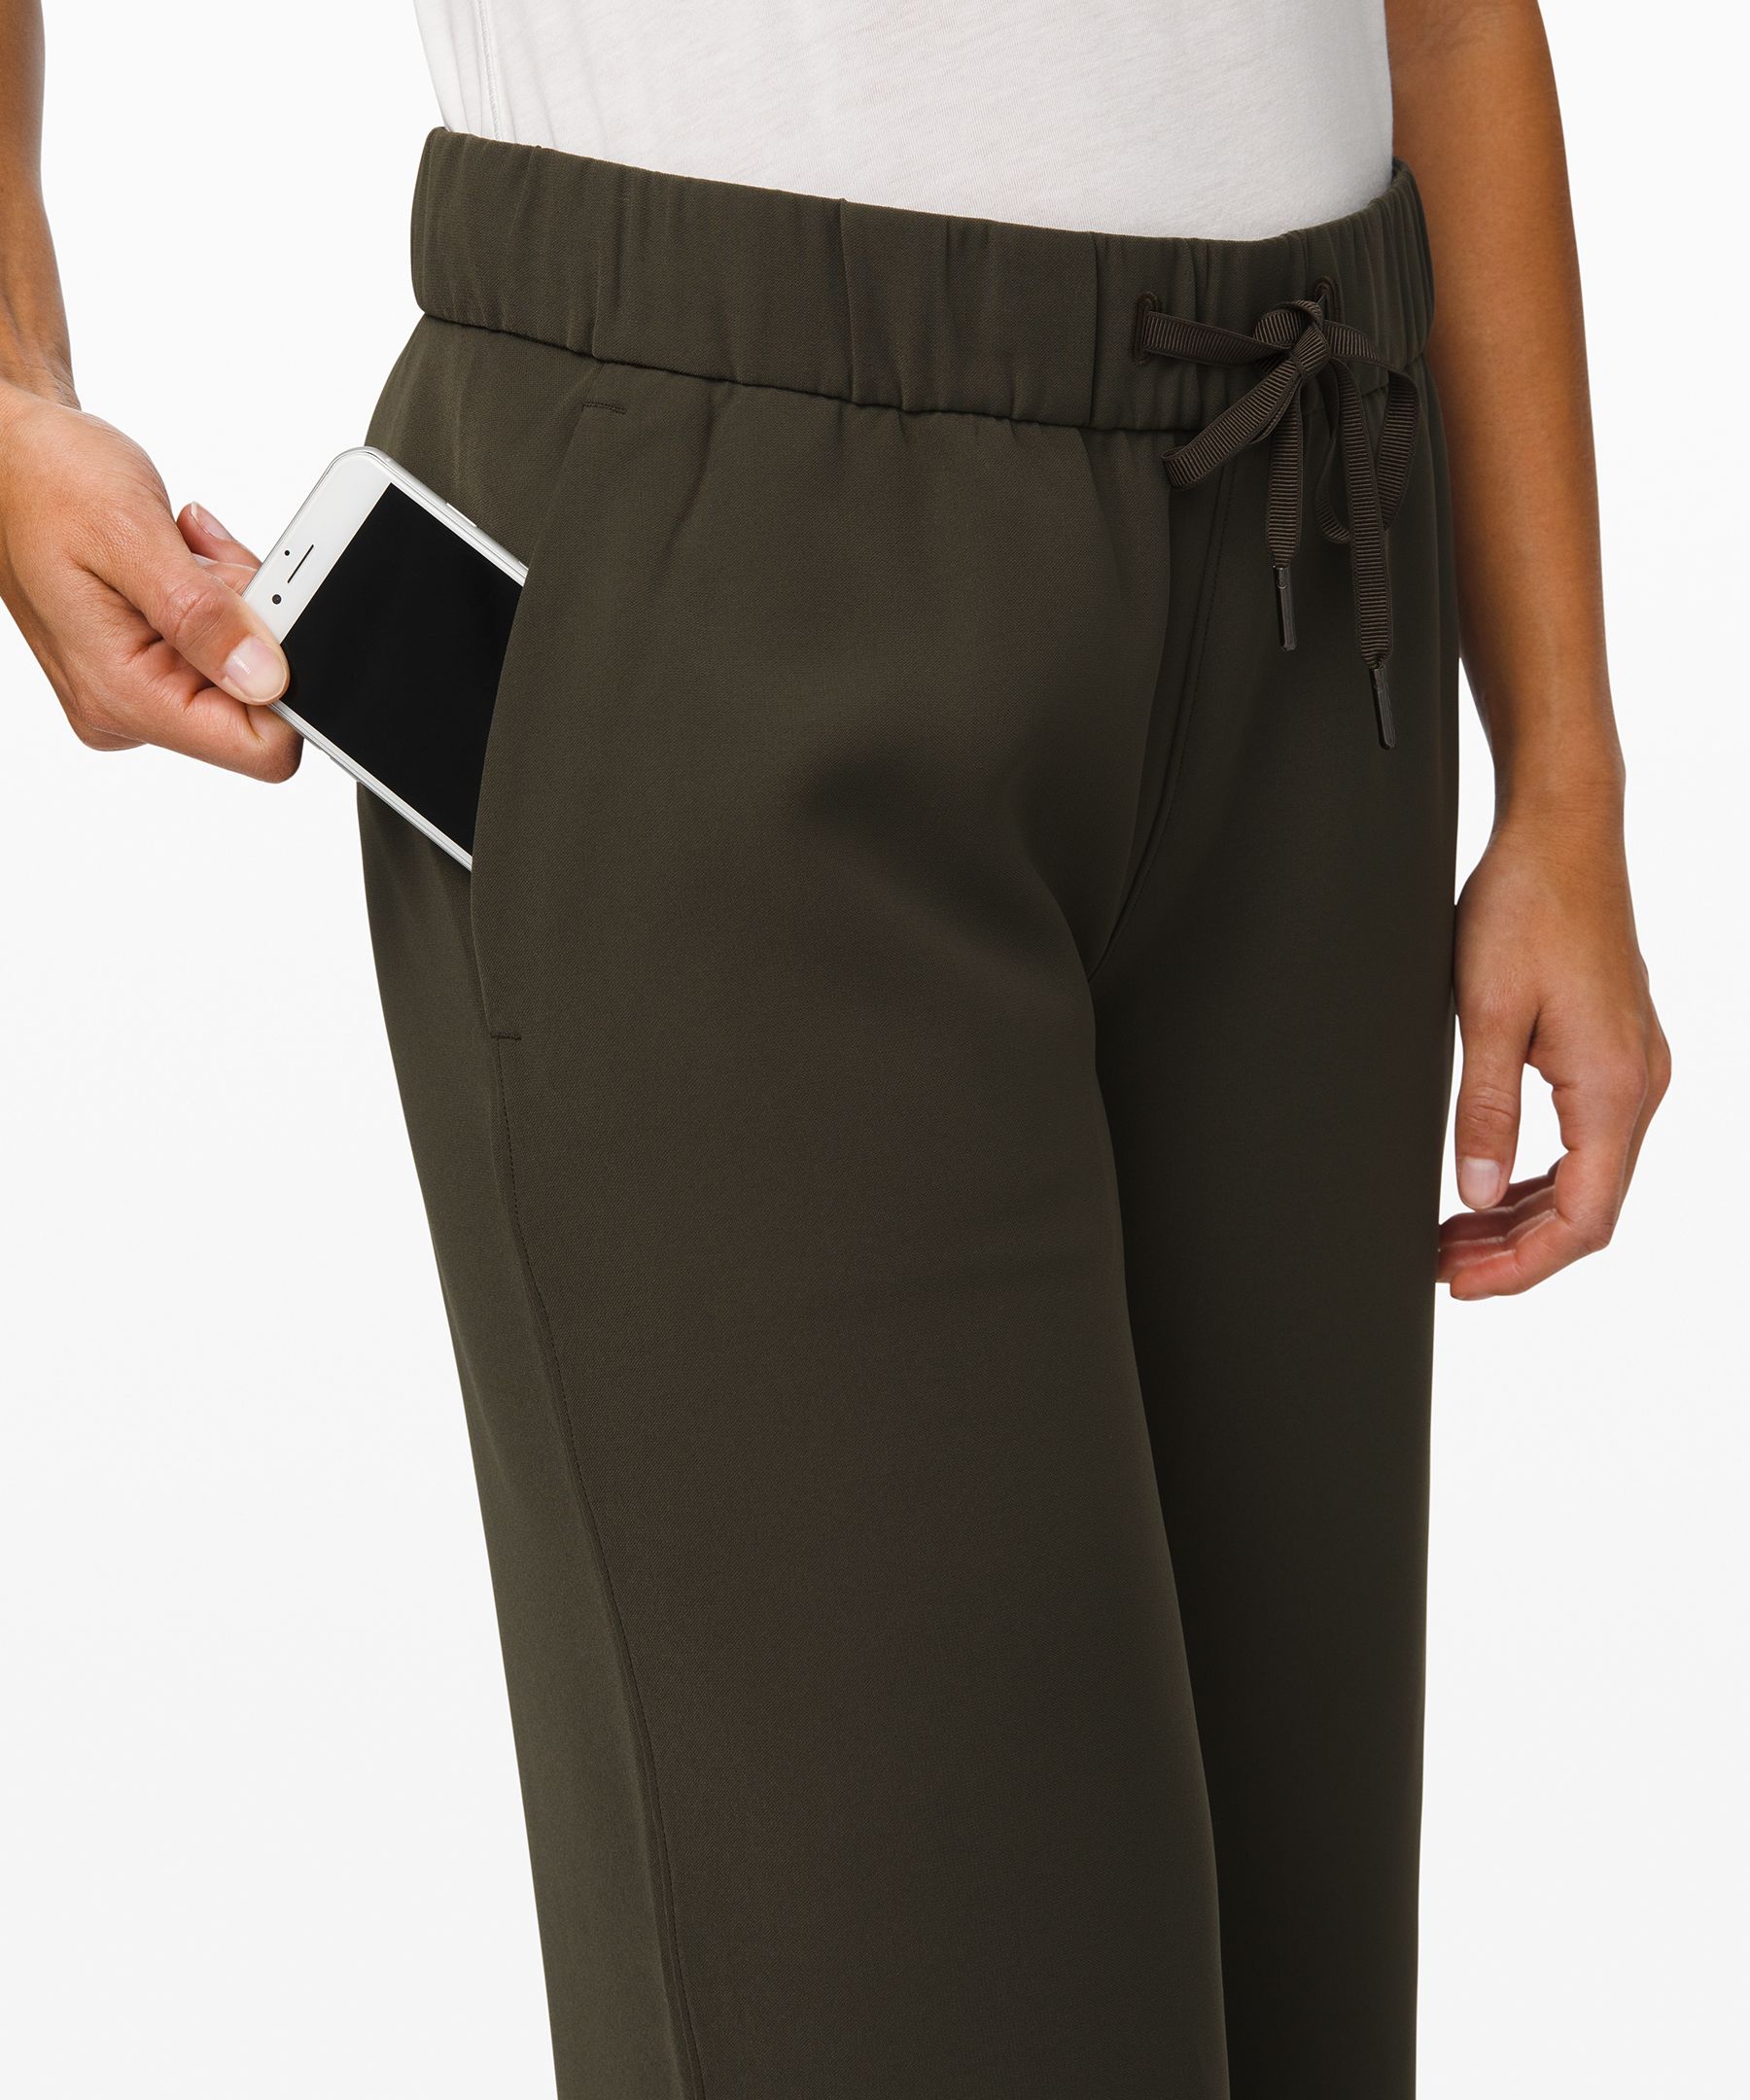 Lululemon On the Fly Pants Womens Size 4 Olive Green Cropped 7/8